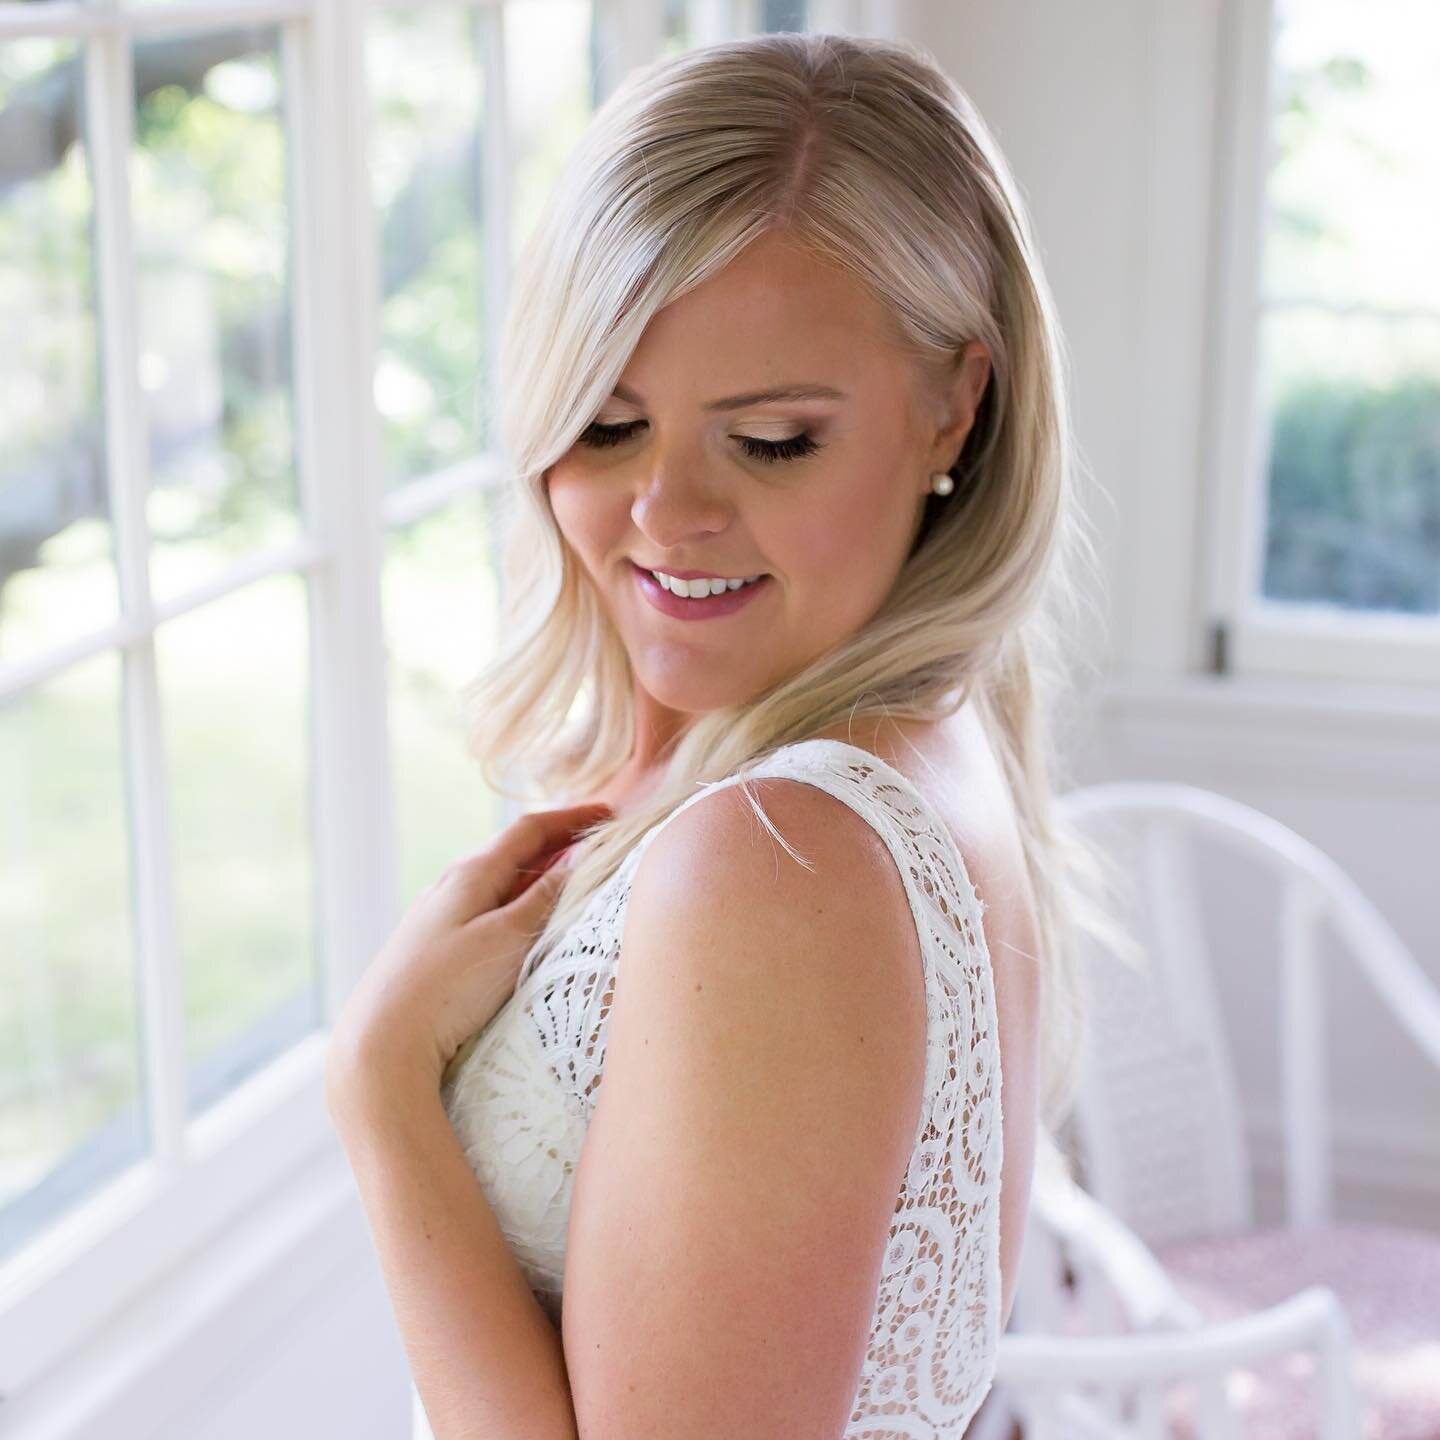 Brides, you&rsquo;re gonna want to save this!

This gorgeous bride is rocking one of my most requested bridal looks, and honestly it&rsquo;s one of my favourites to create.

It has all the elements that I adore in a perfectly curated bridal makeup:

